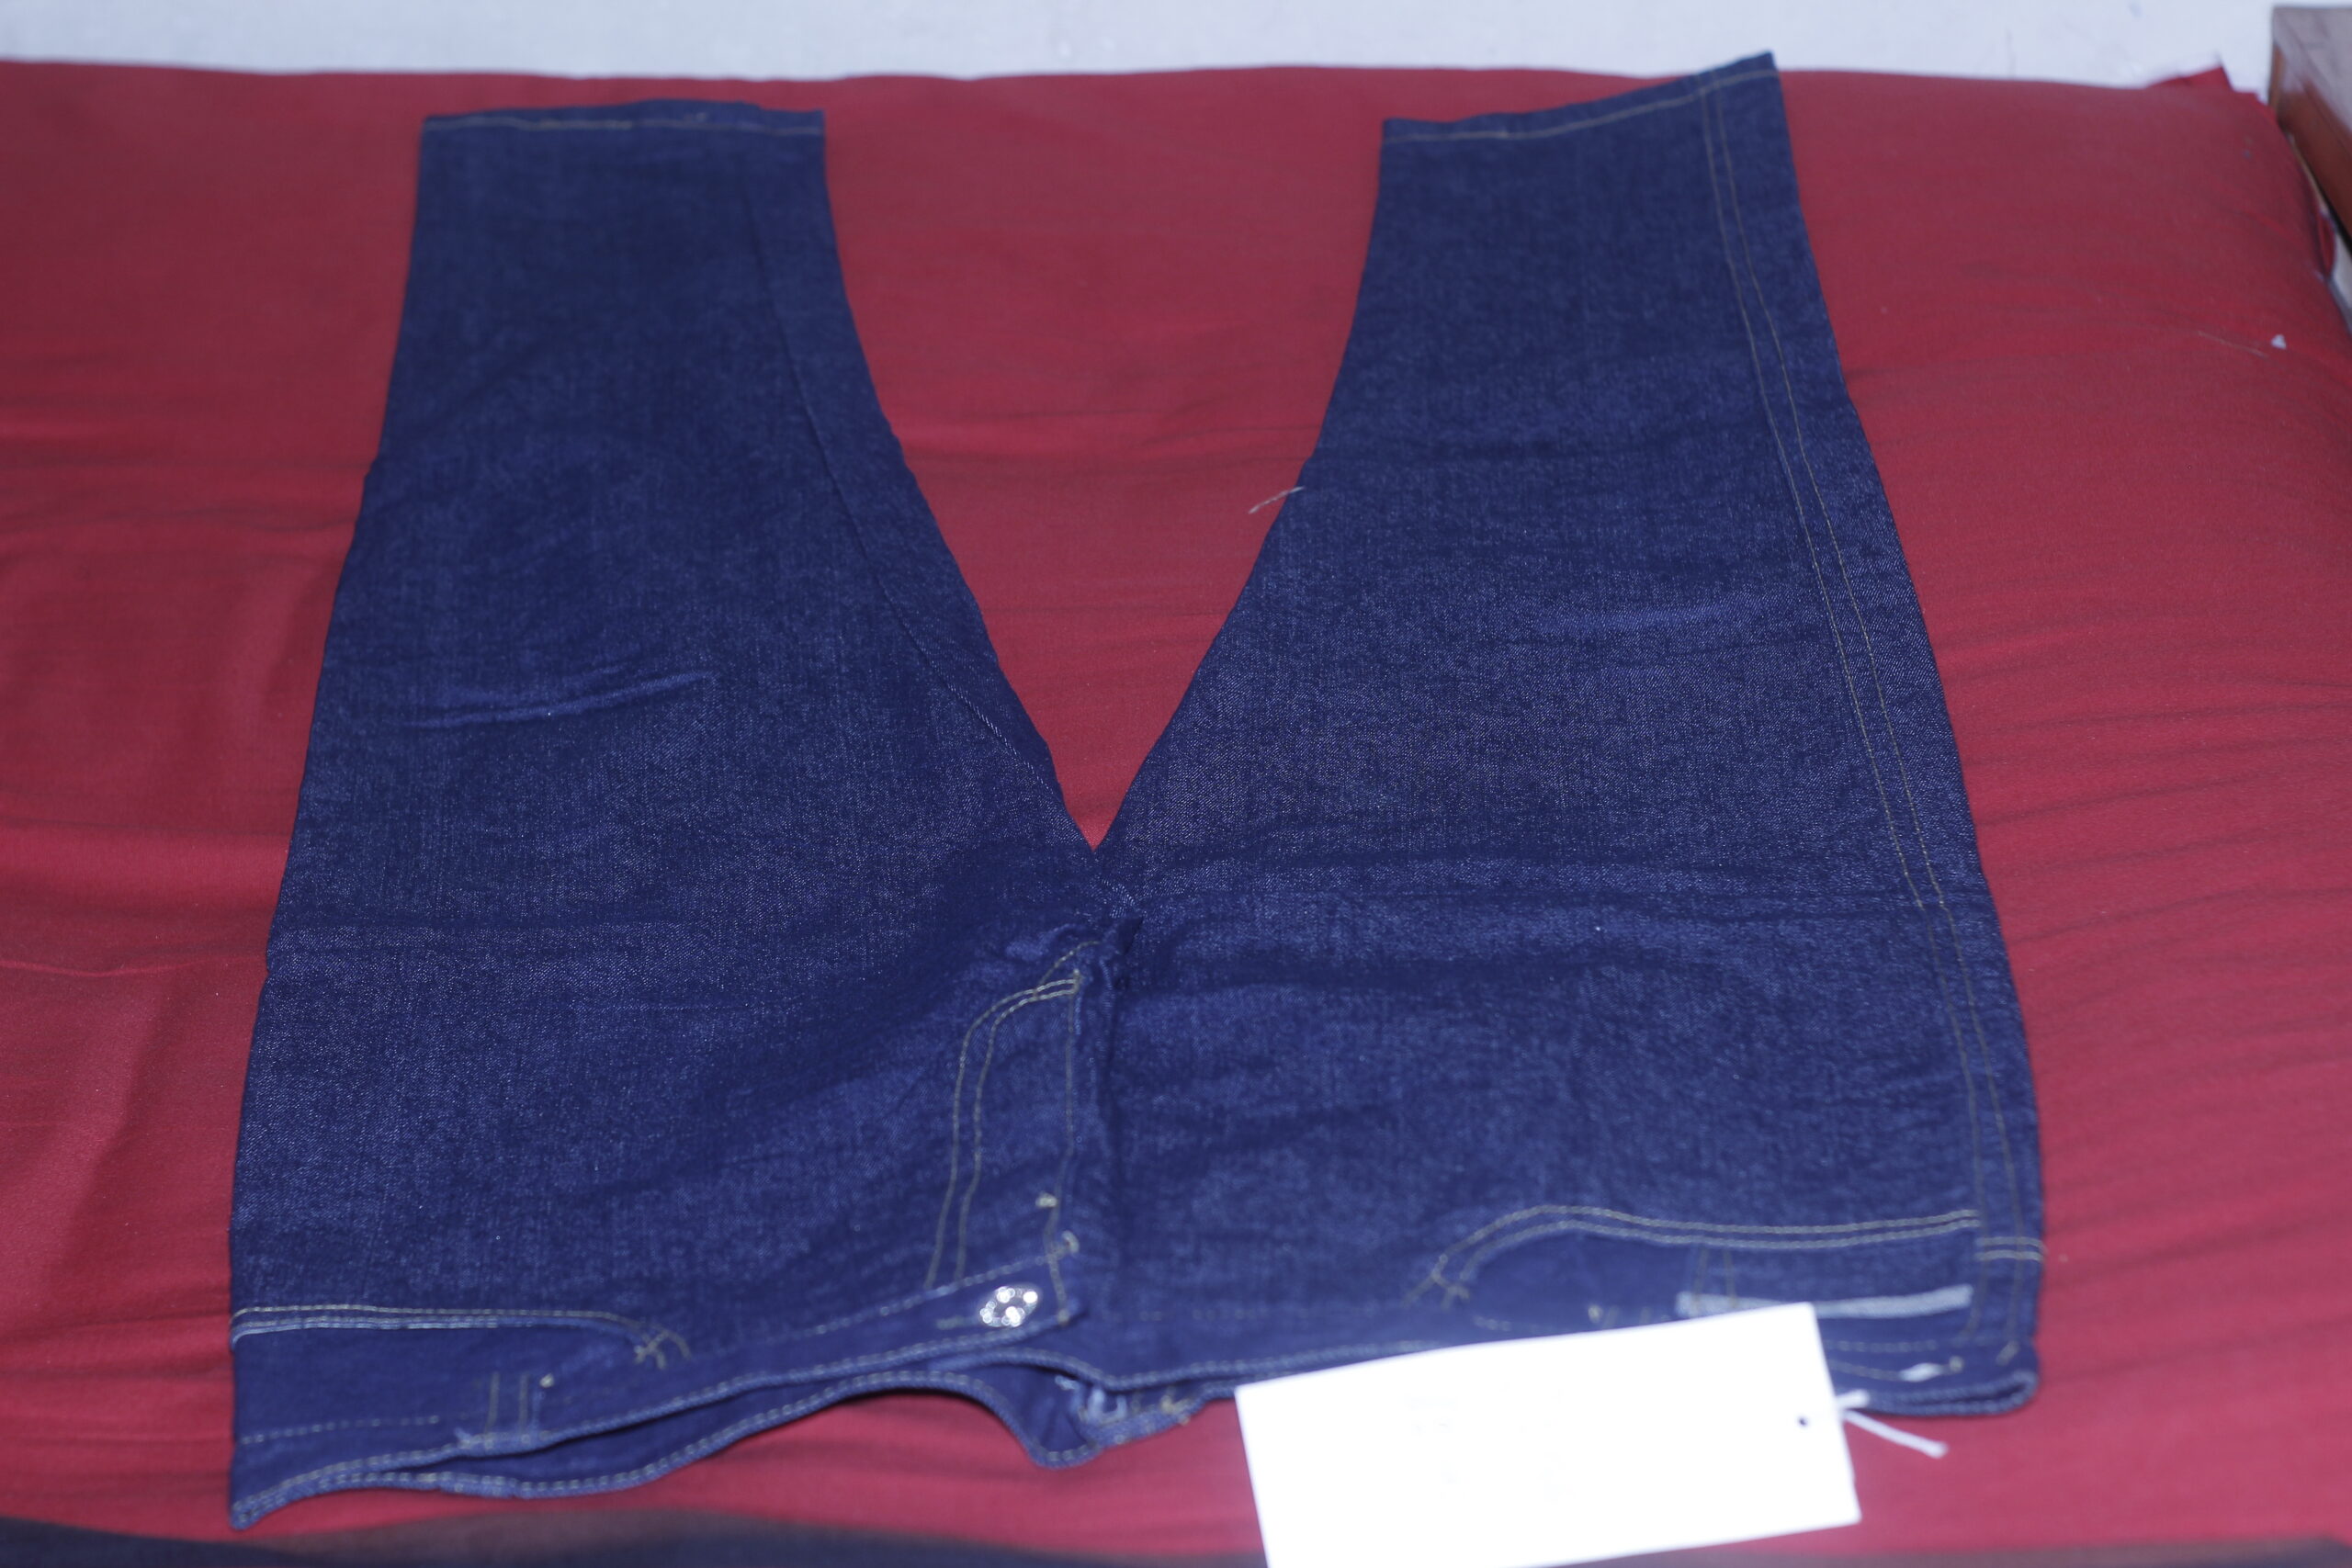 Jeans Pant For Man Size: 36